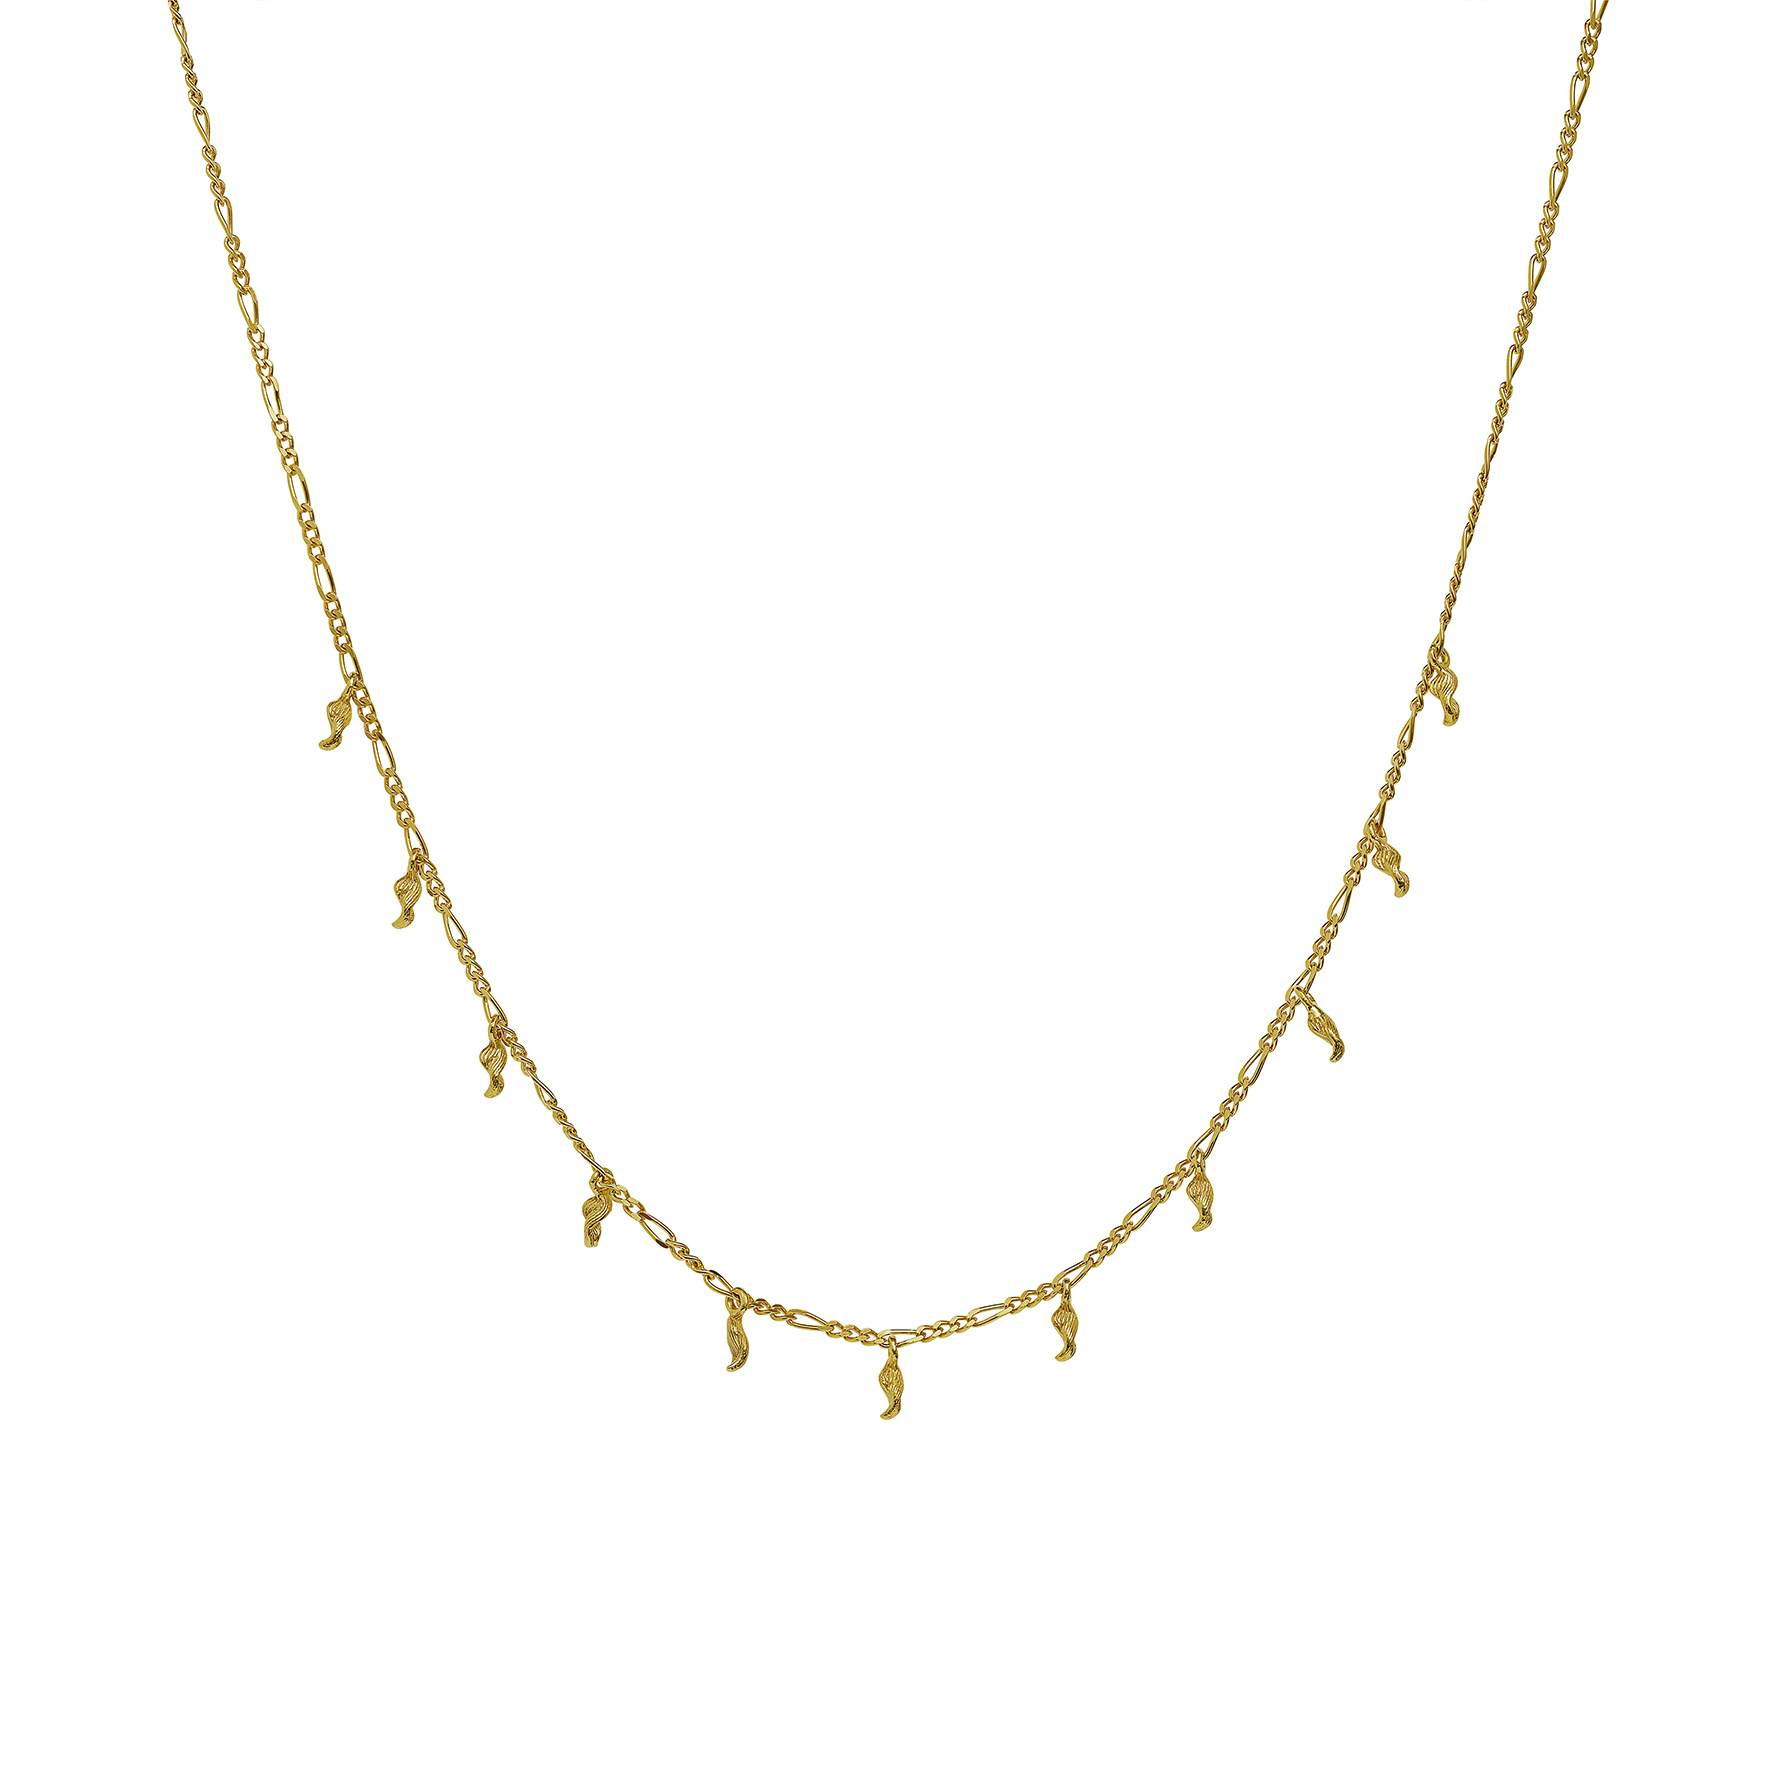 Jules Necklace from Maanesten in Goldplated-Silver Sterling 925